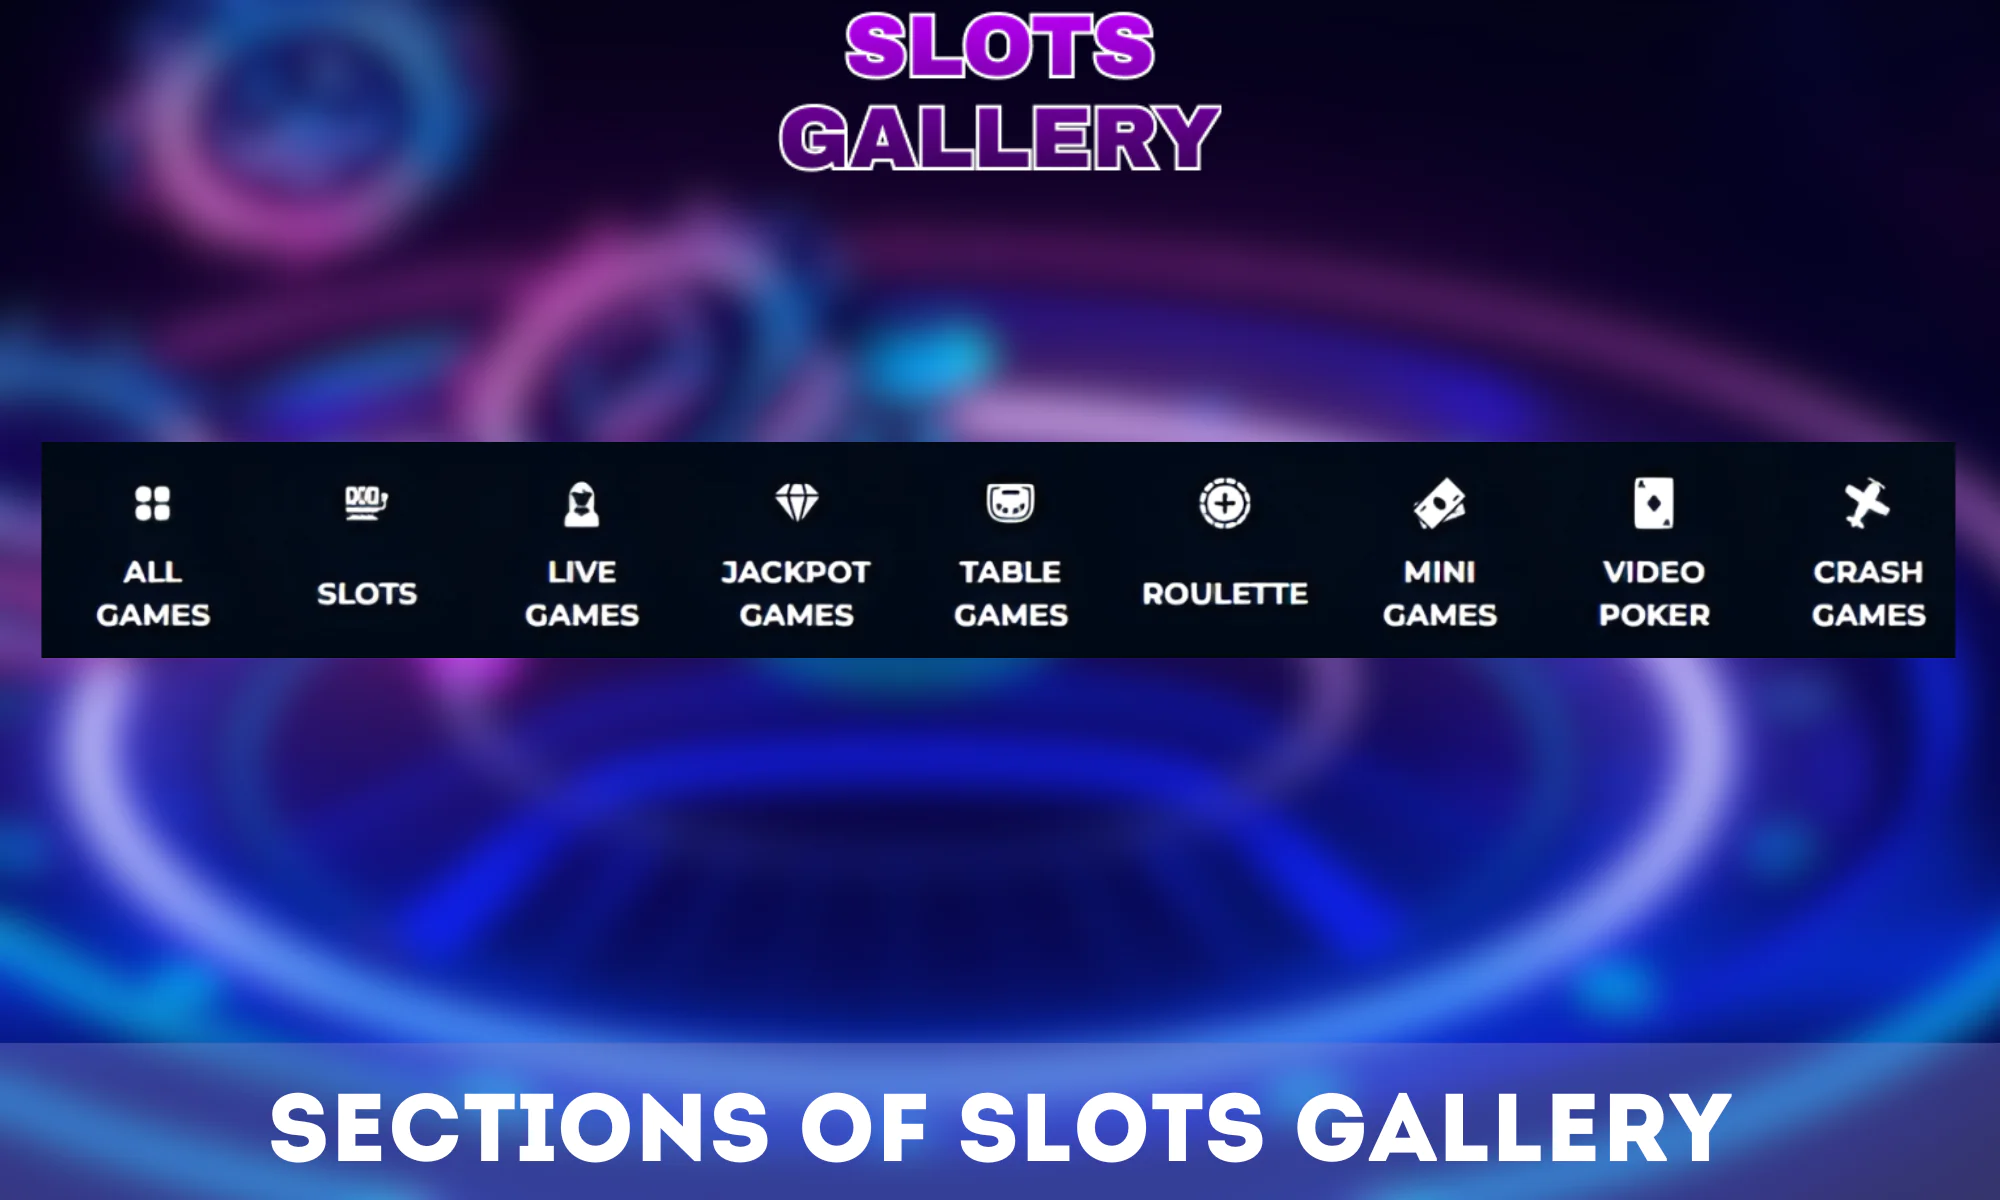 The Slots Gallery offers over 5,000 games and divides the site into several sections